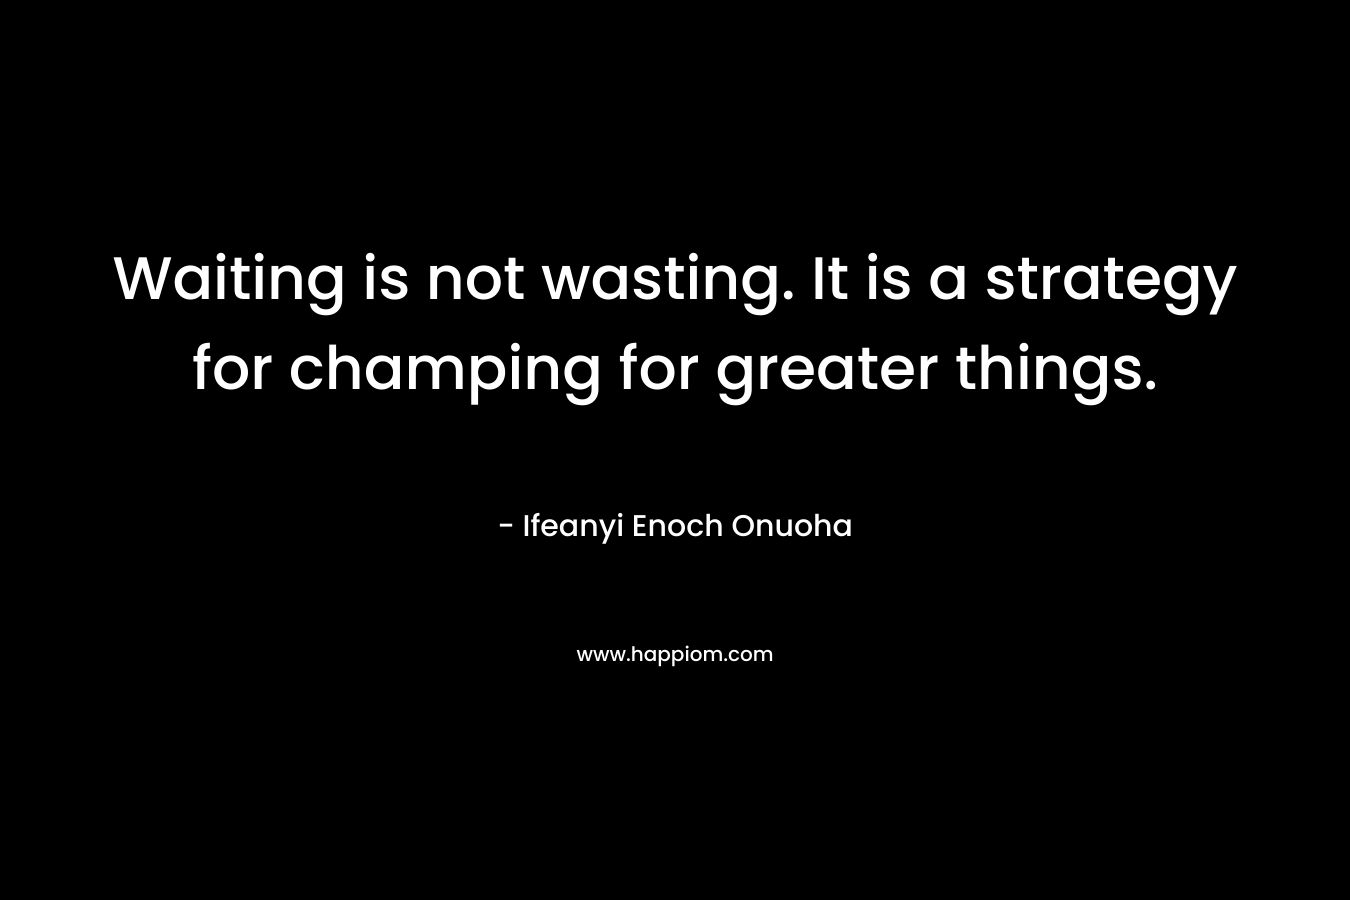 Waiting is not wasting. It is a strategy for champing for greater things. – Ifeanyi Enoch Onuoha